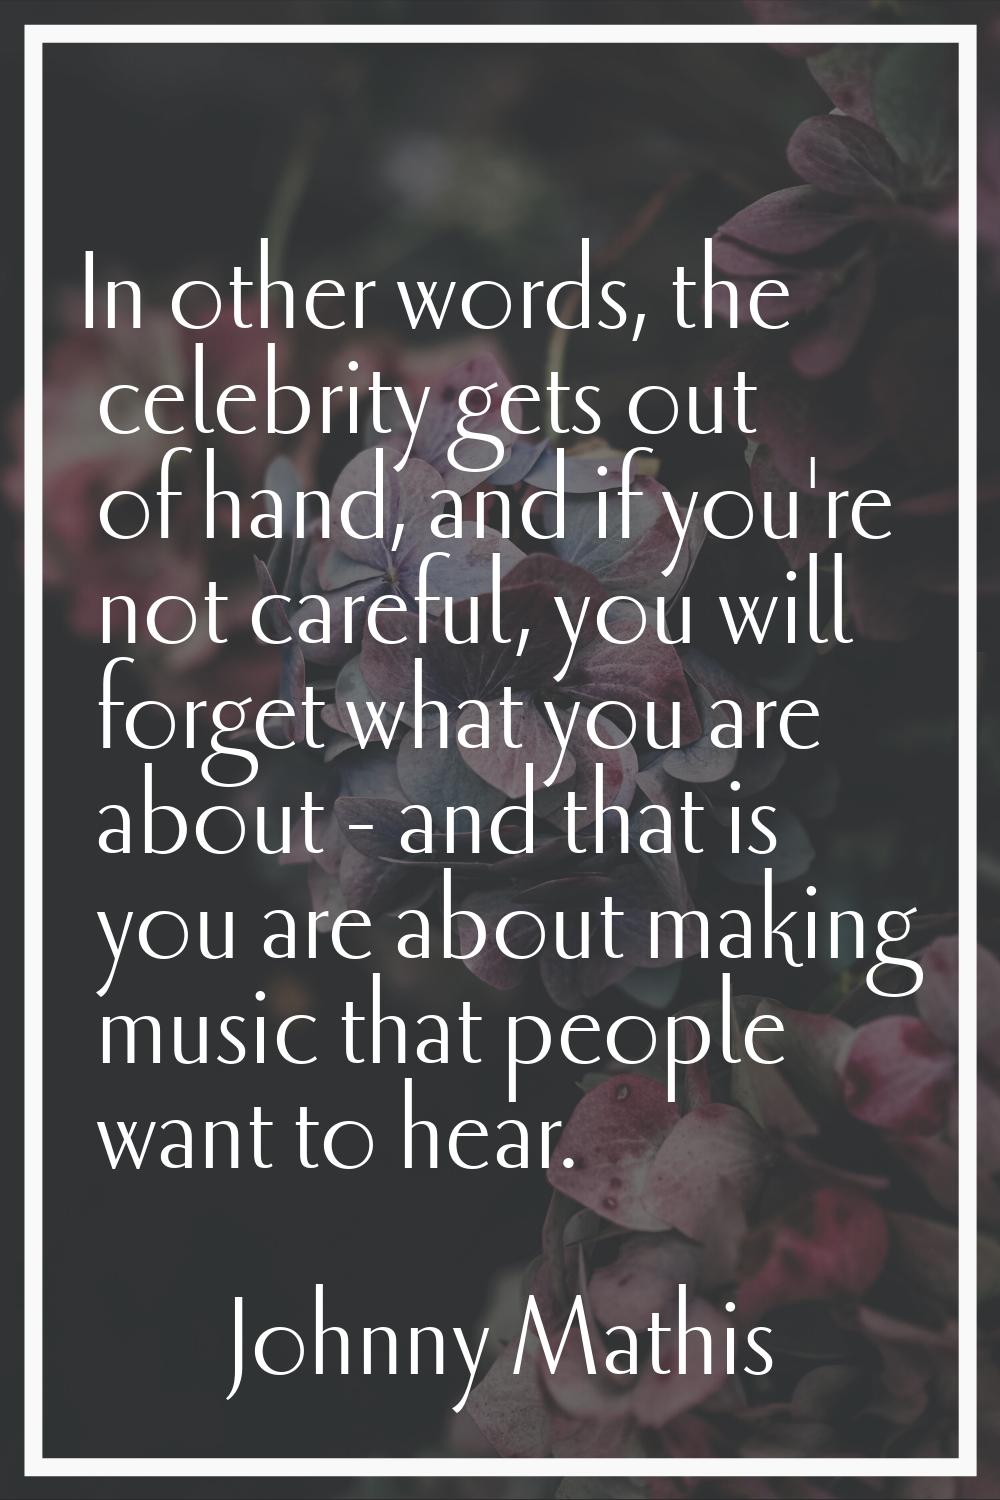 In other words, the celebrity gets out of hand, and if you're not careful, you will forget what you